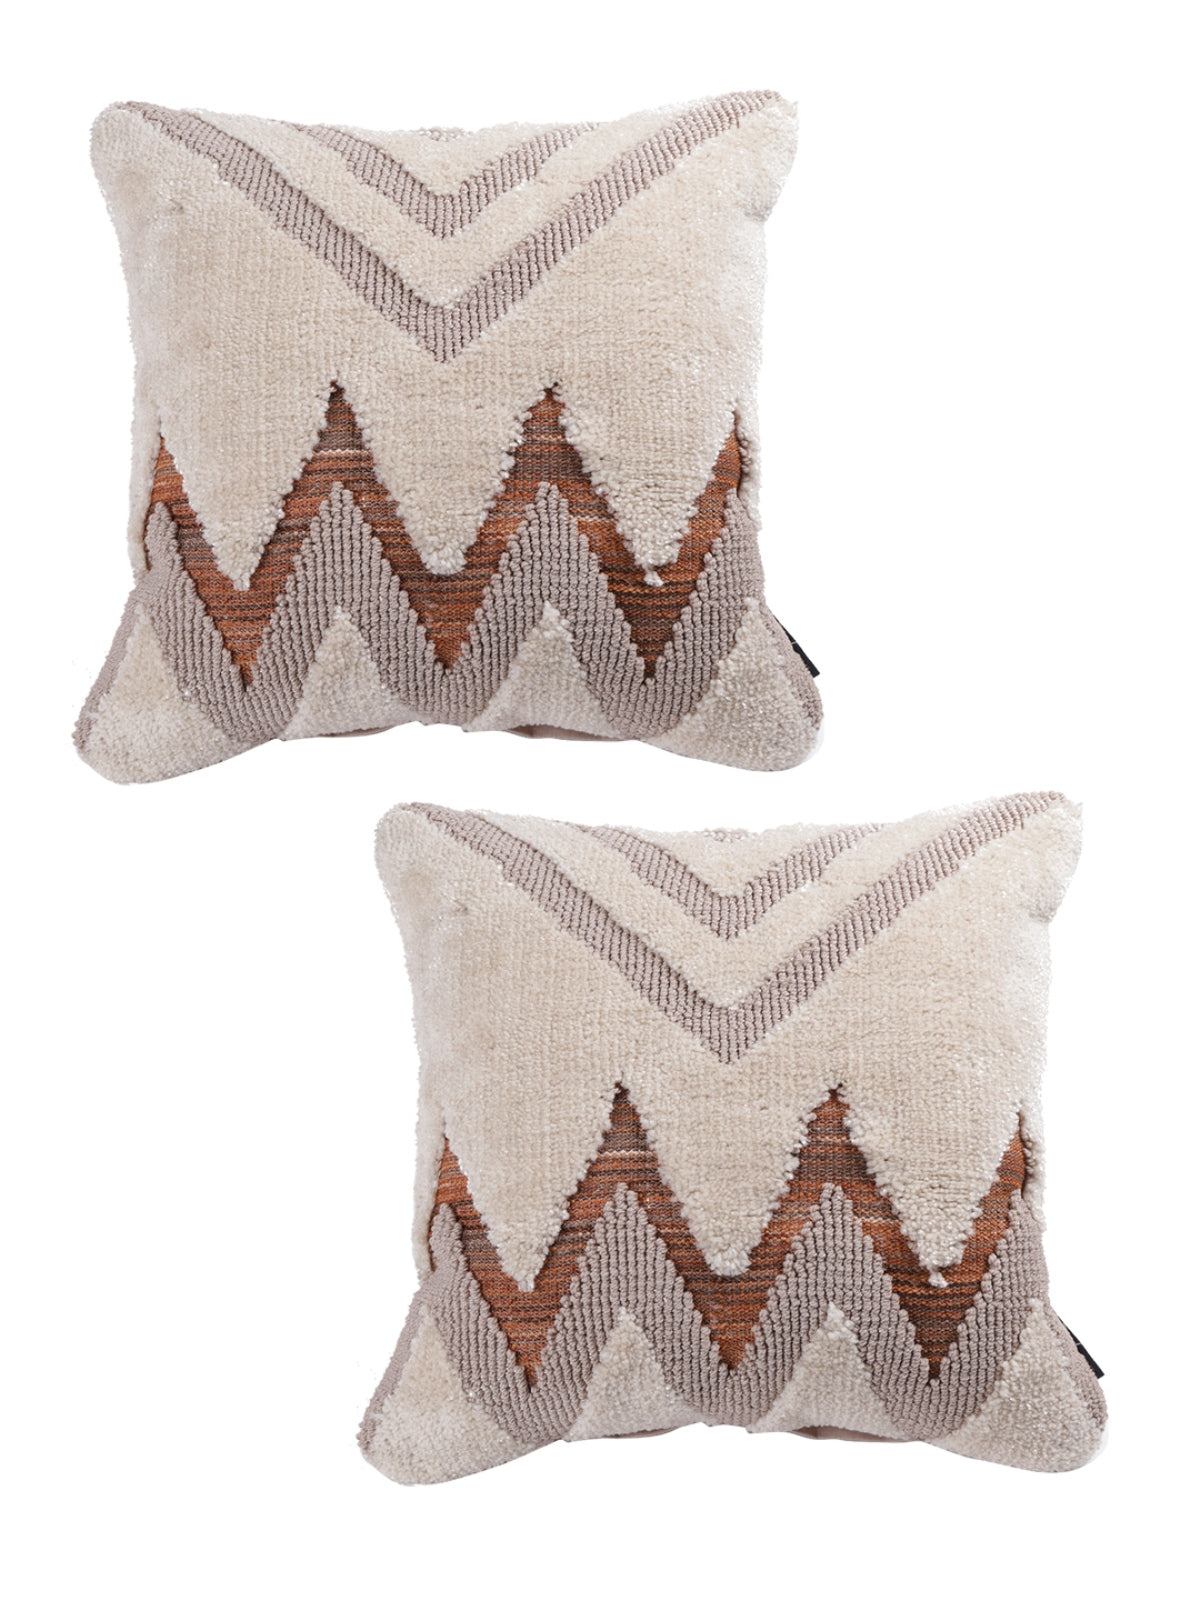 Beige Set of 2 Wool Tufted 18 Inch x 18 Inch Cushion Covers